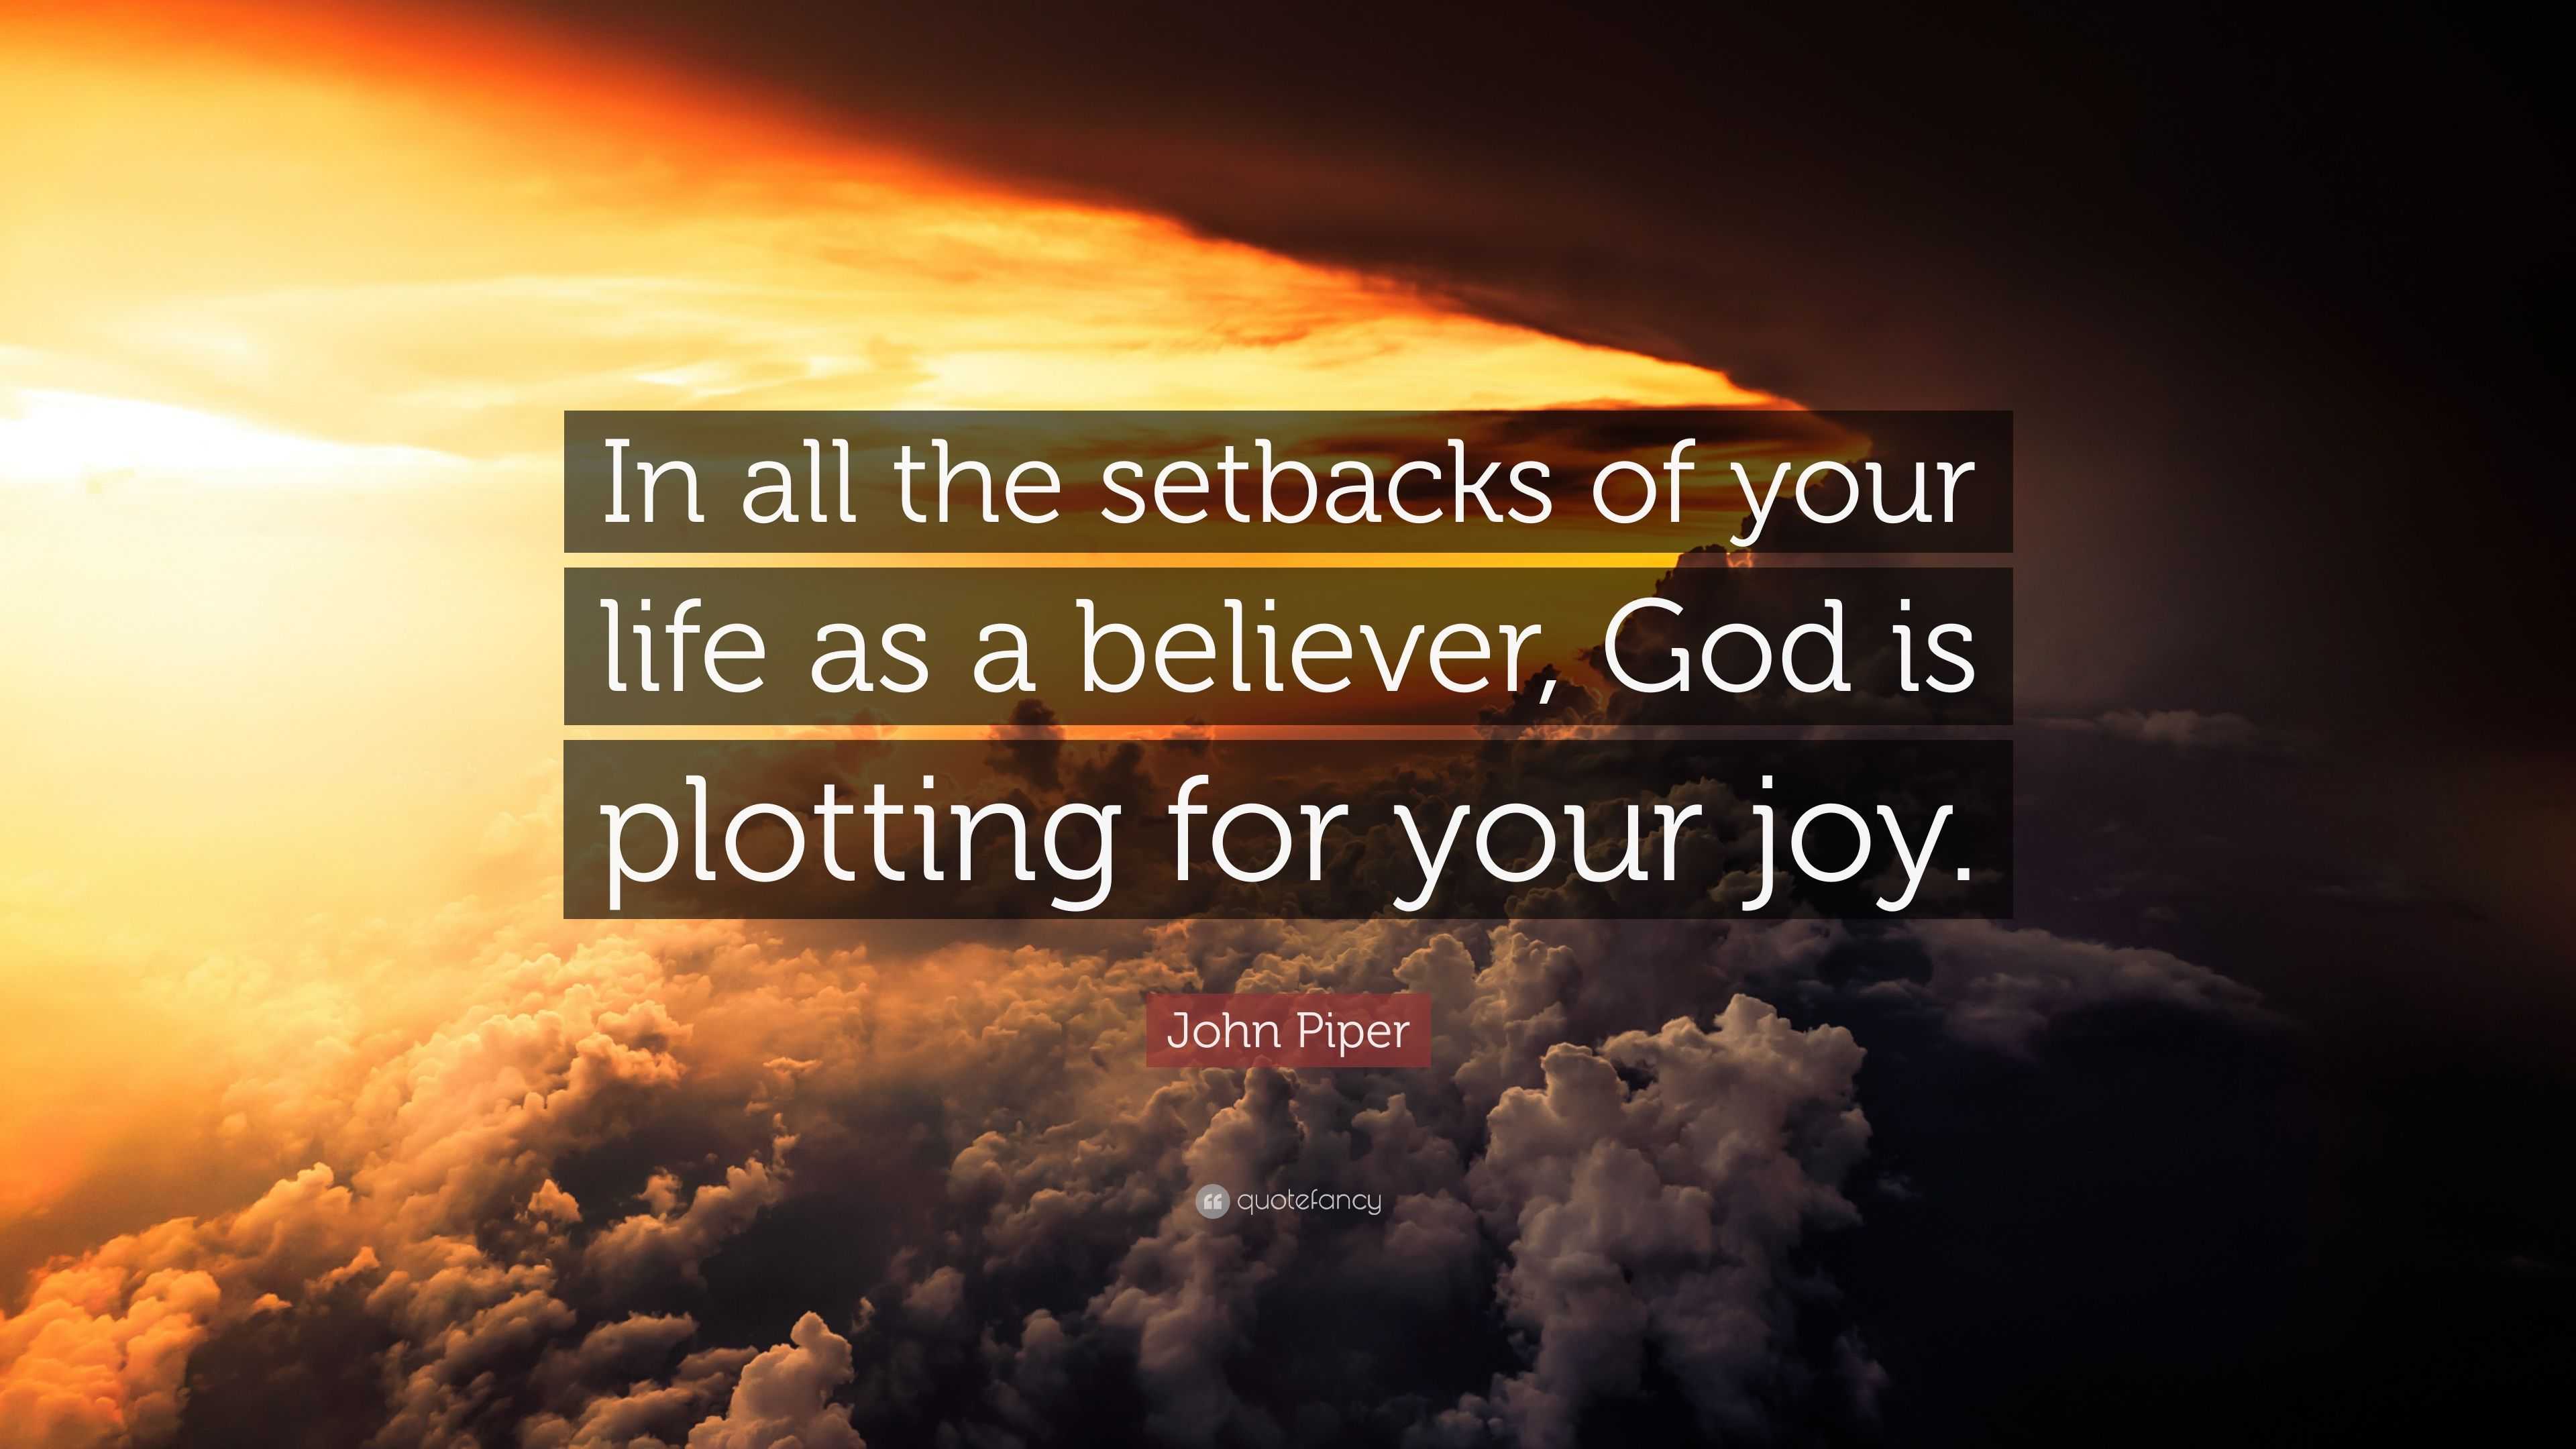 John Piper Quote: “In all the setbacks of your life as a believer, God ...